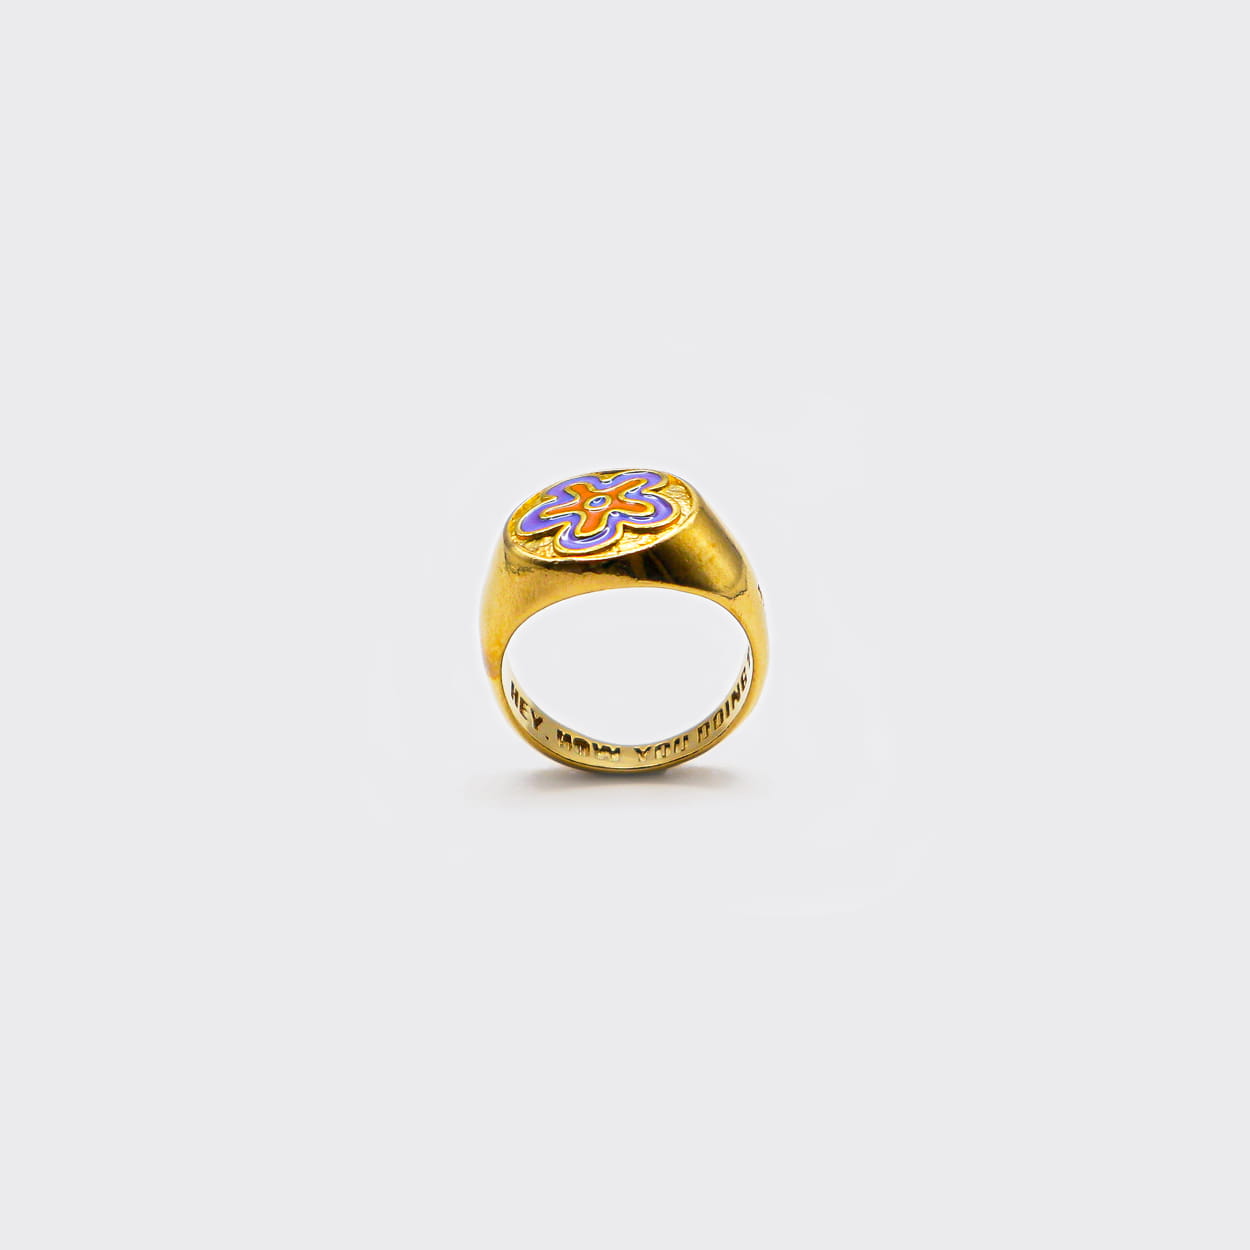 Atelier Domingo's Soul ring is our tribute to the hip-hop group De La Soul. This  ring has been designed in France and is made for both men and women. This jewelry is made of a high-quality 24 karat gold plating.